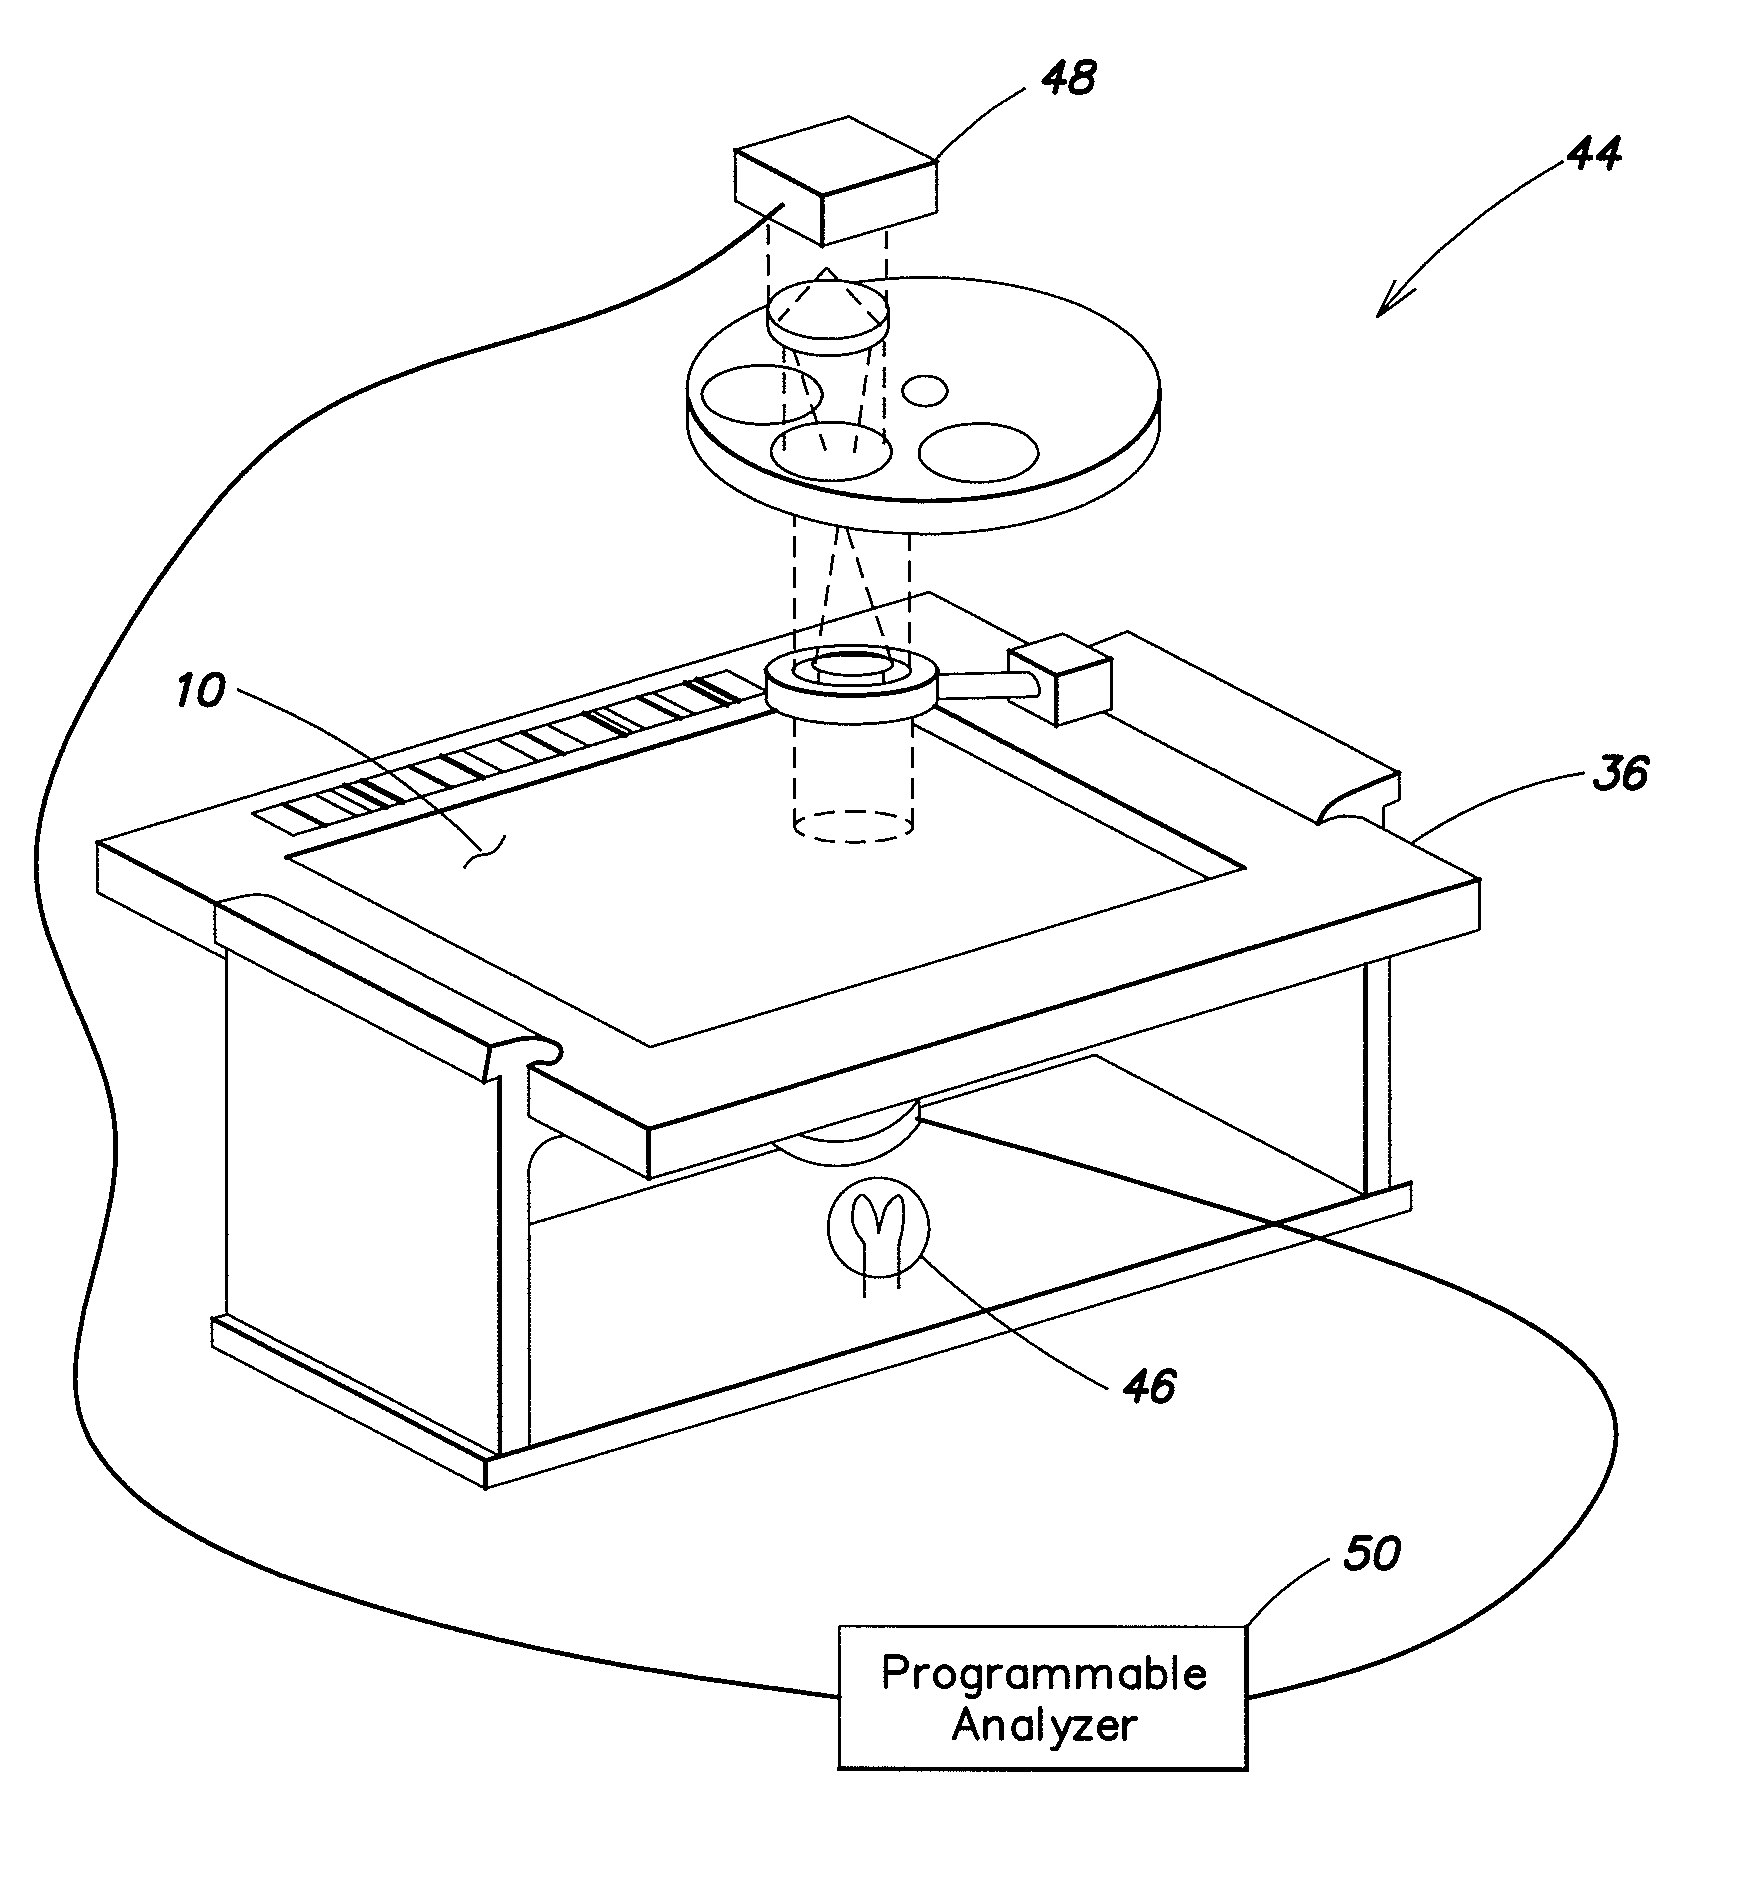 Method and apparatus for detecting and counting platelets individually and in aggregate clumps